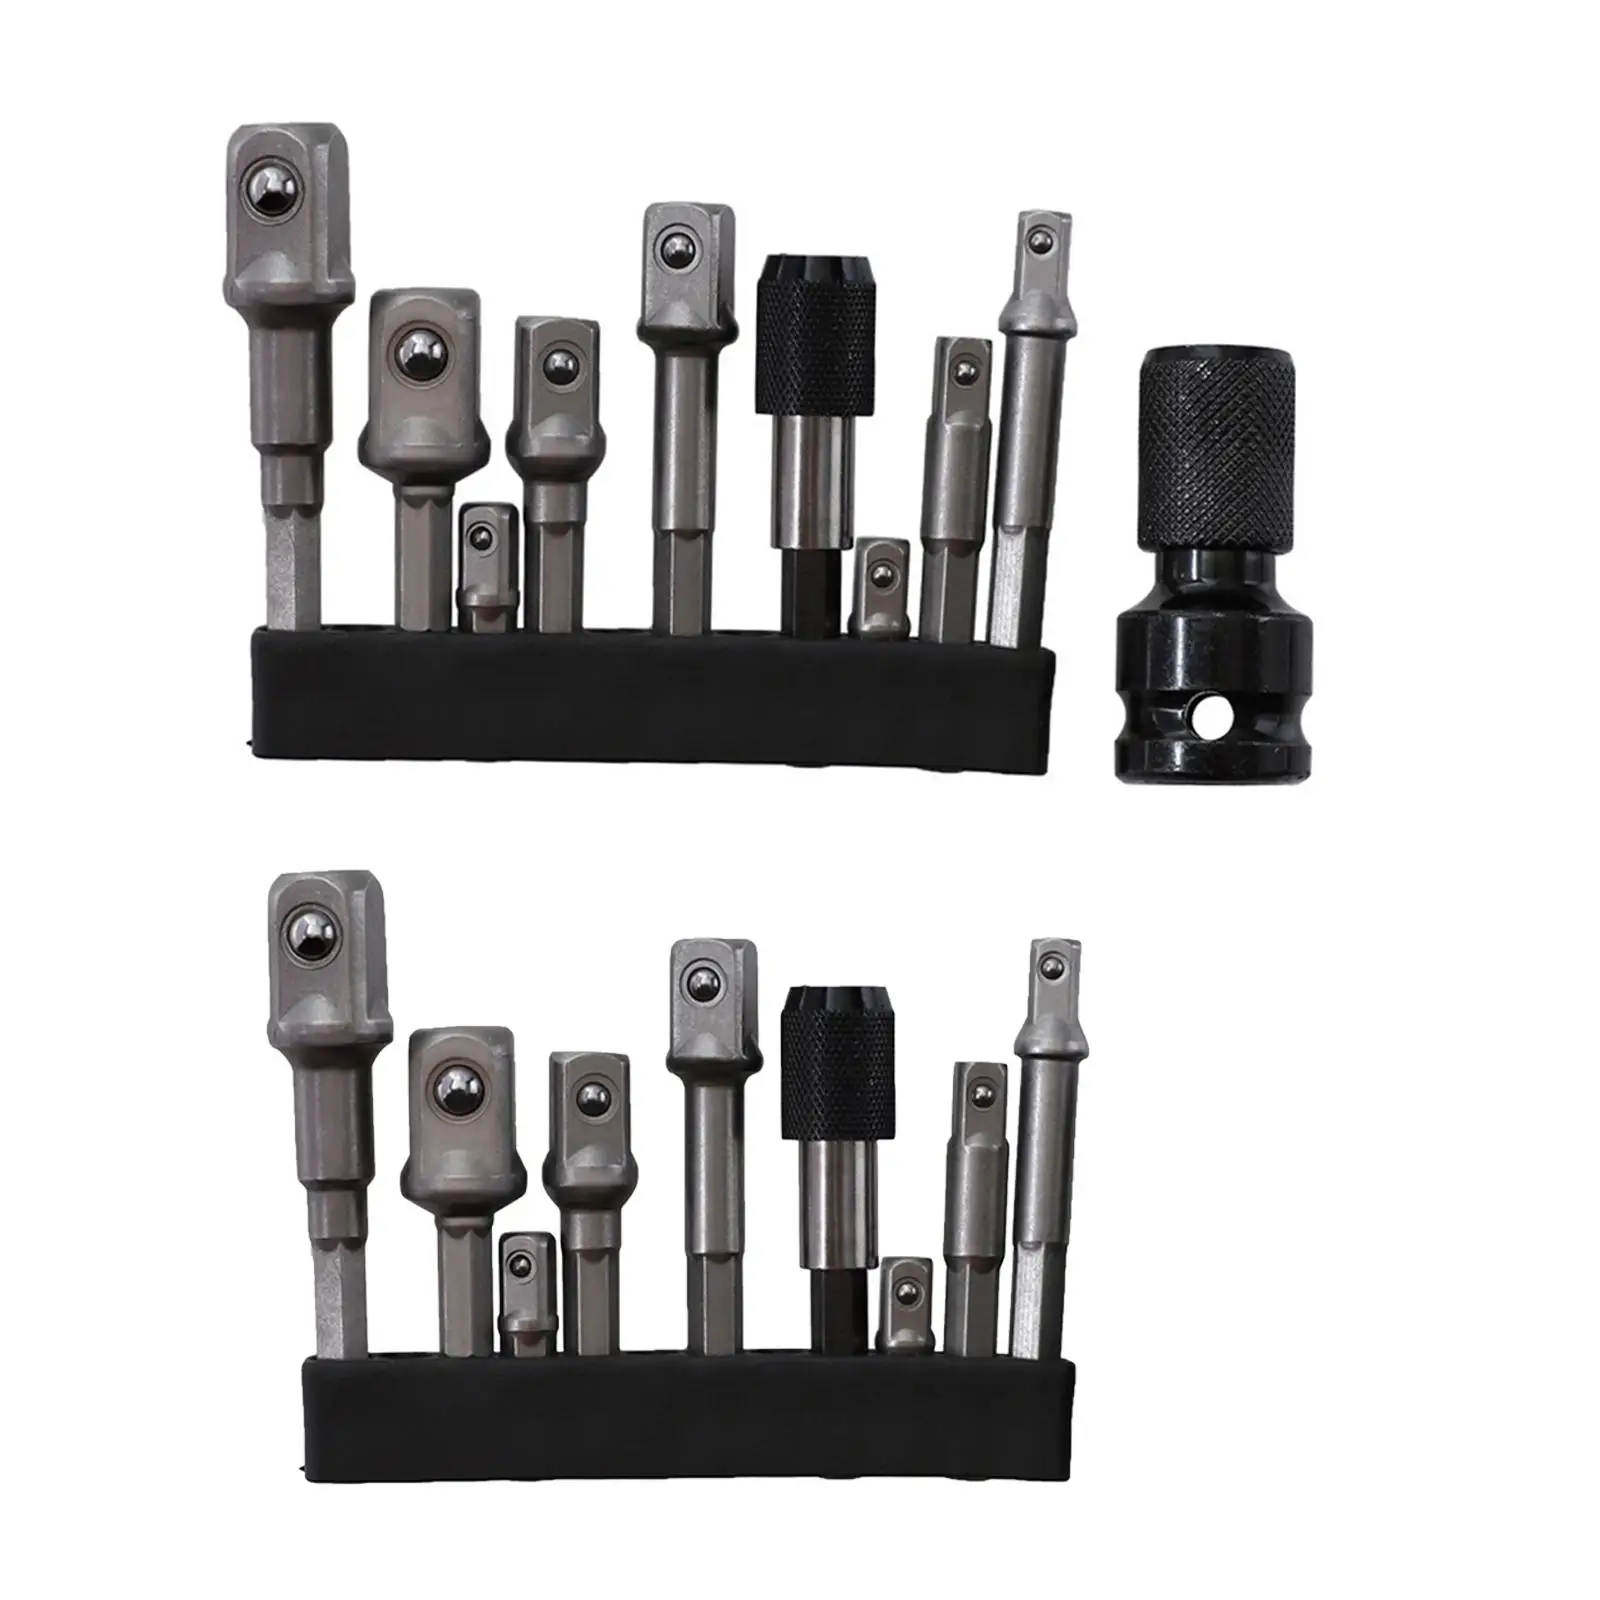 Chrome Impact Grade Socket Adapter Set Extension Set 8Pcs Drill Adapters Hardware for Power Drill Driver Electric Screwdriver